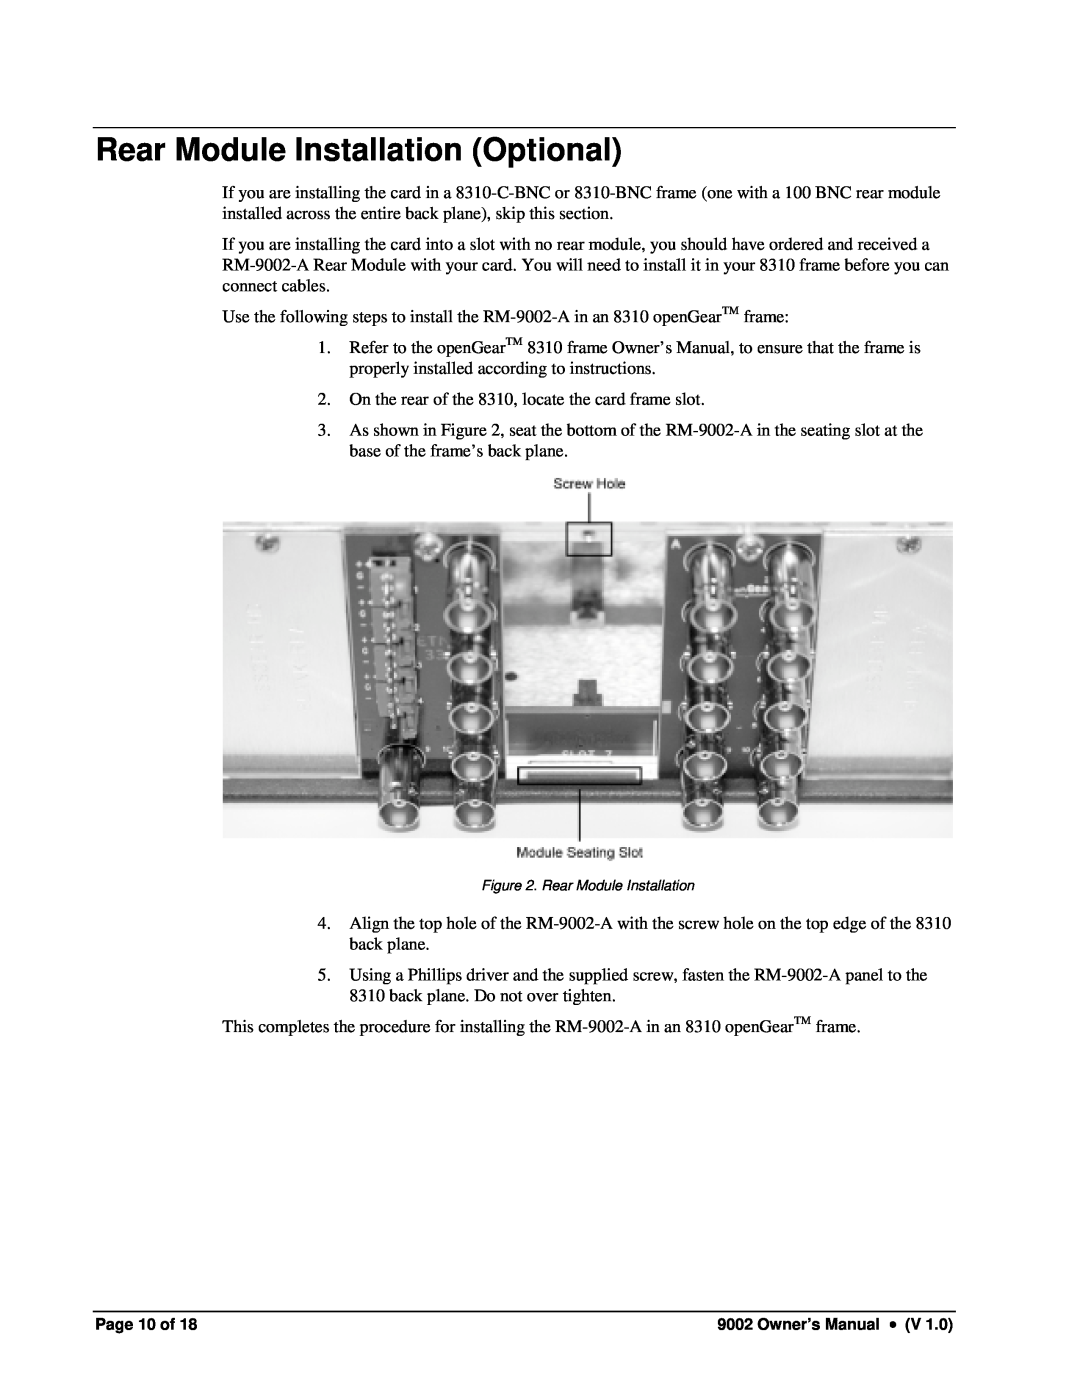 Cobalt Networks 9002 owner manual Rear Module Installation Optional, Page 10 of 